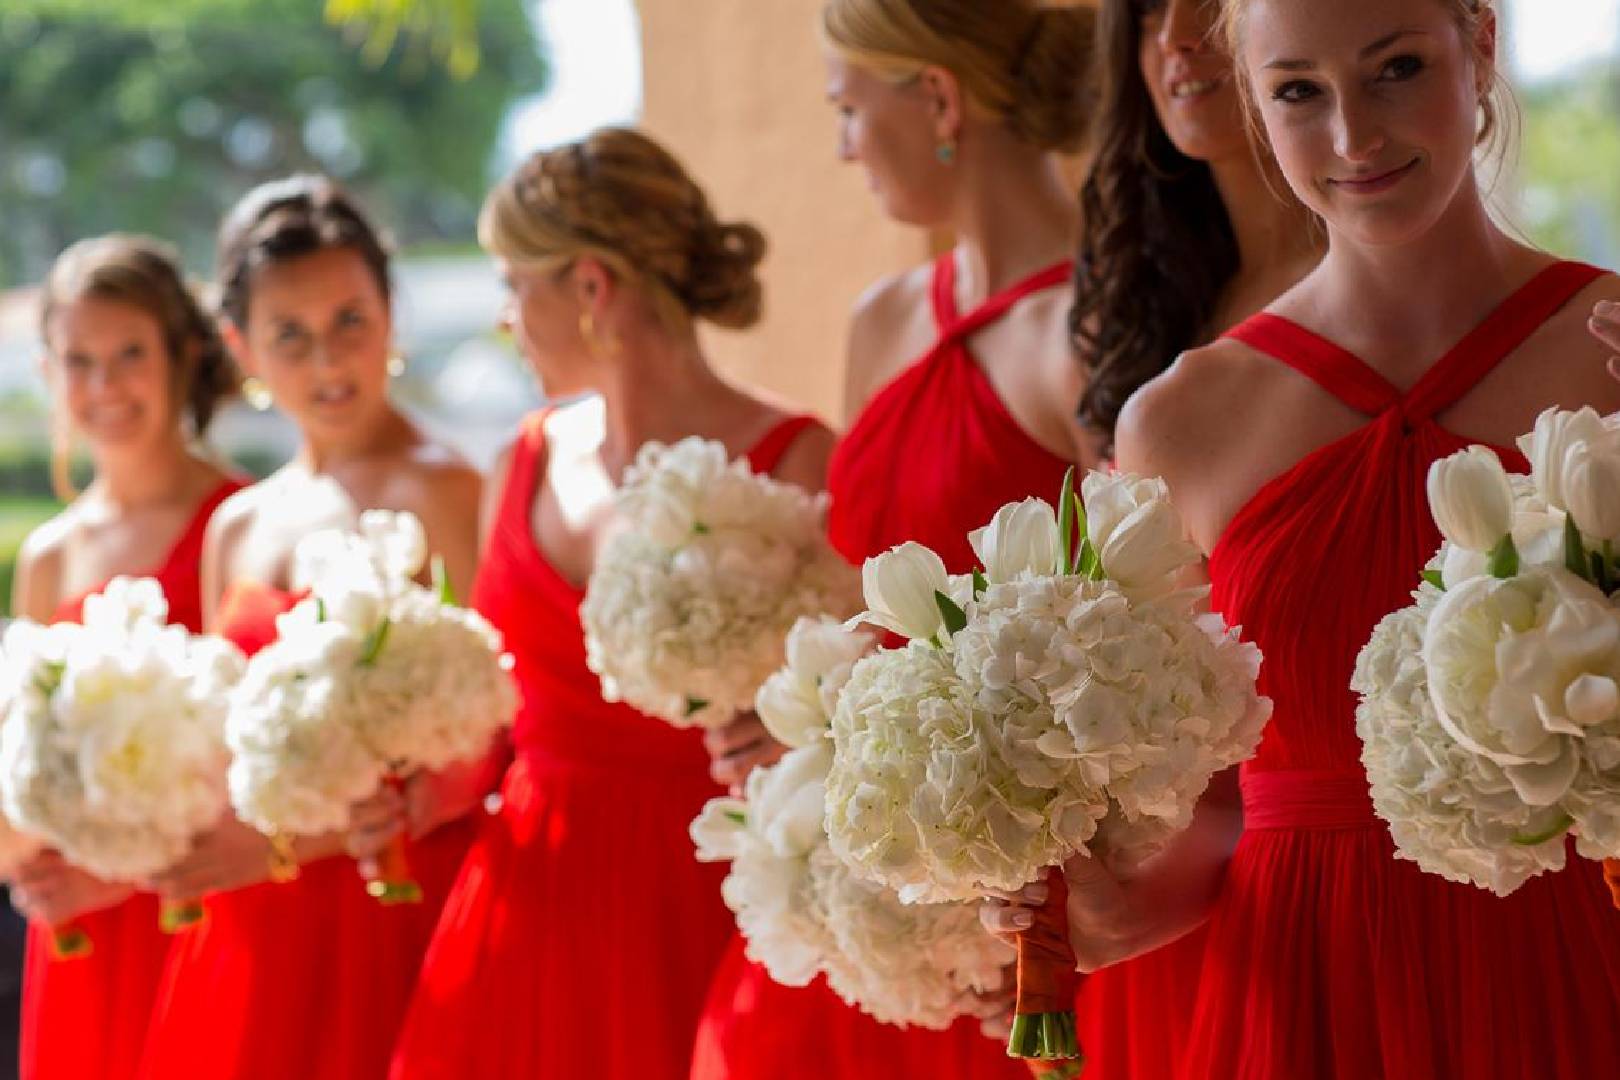 Five bridesmaids in red dresses holding white bouquets, standing in a line, with one looking at the camera.